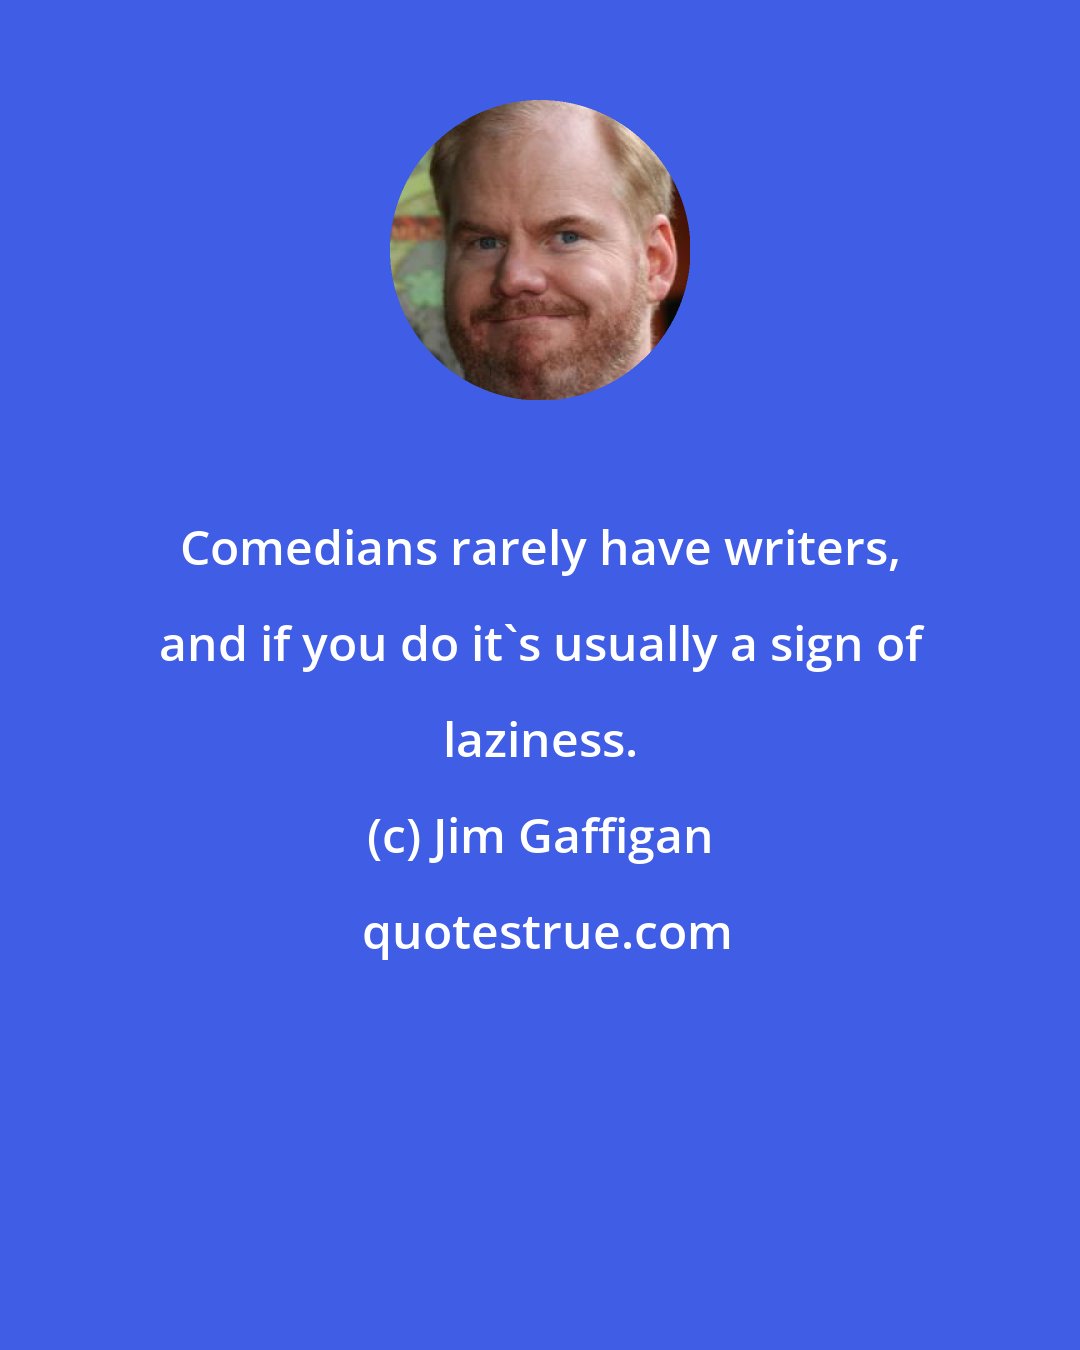 Jim Gaffigan: Comedians rarely have writers, and if you do it's usually a sign of laziness.